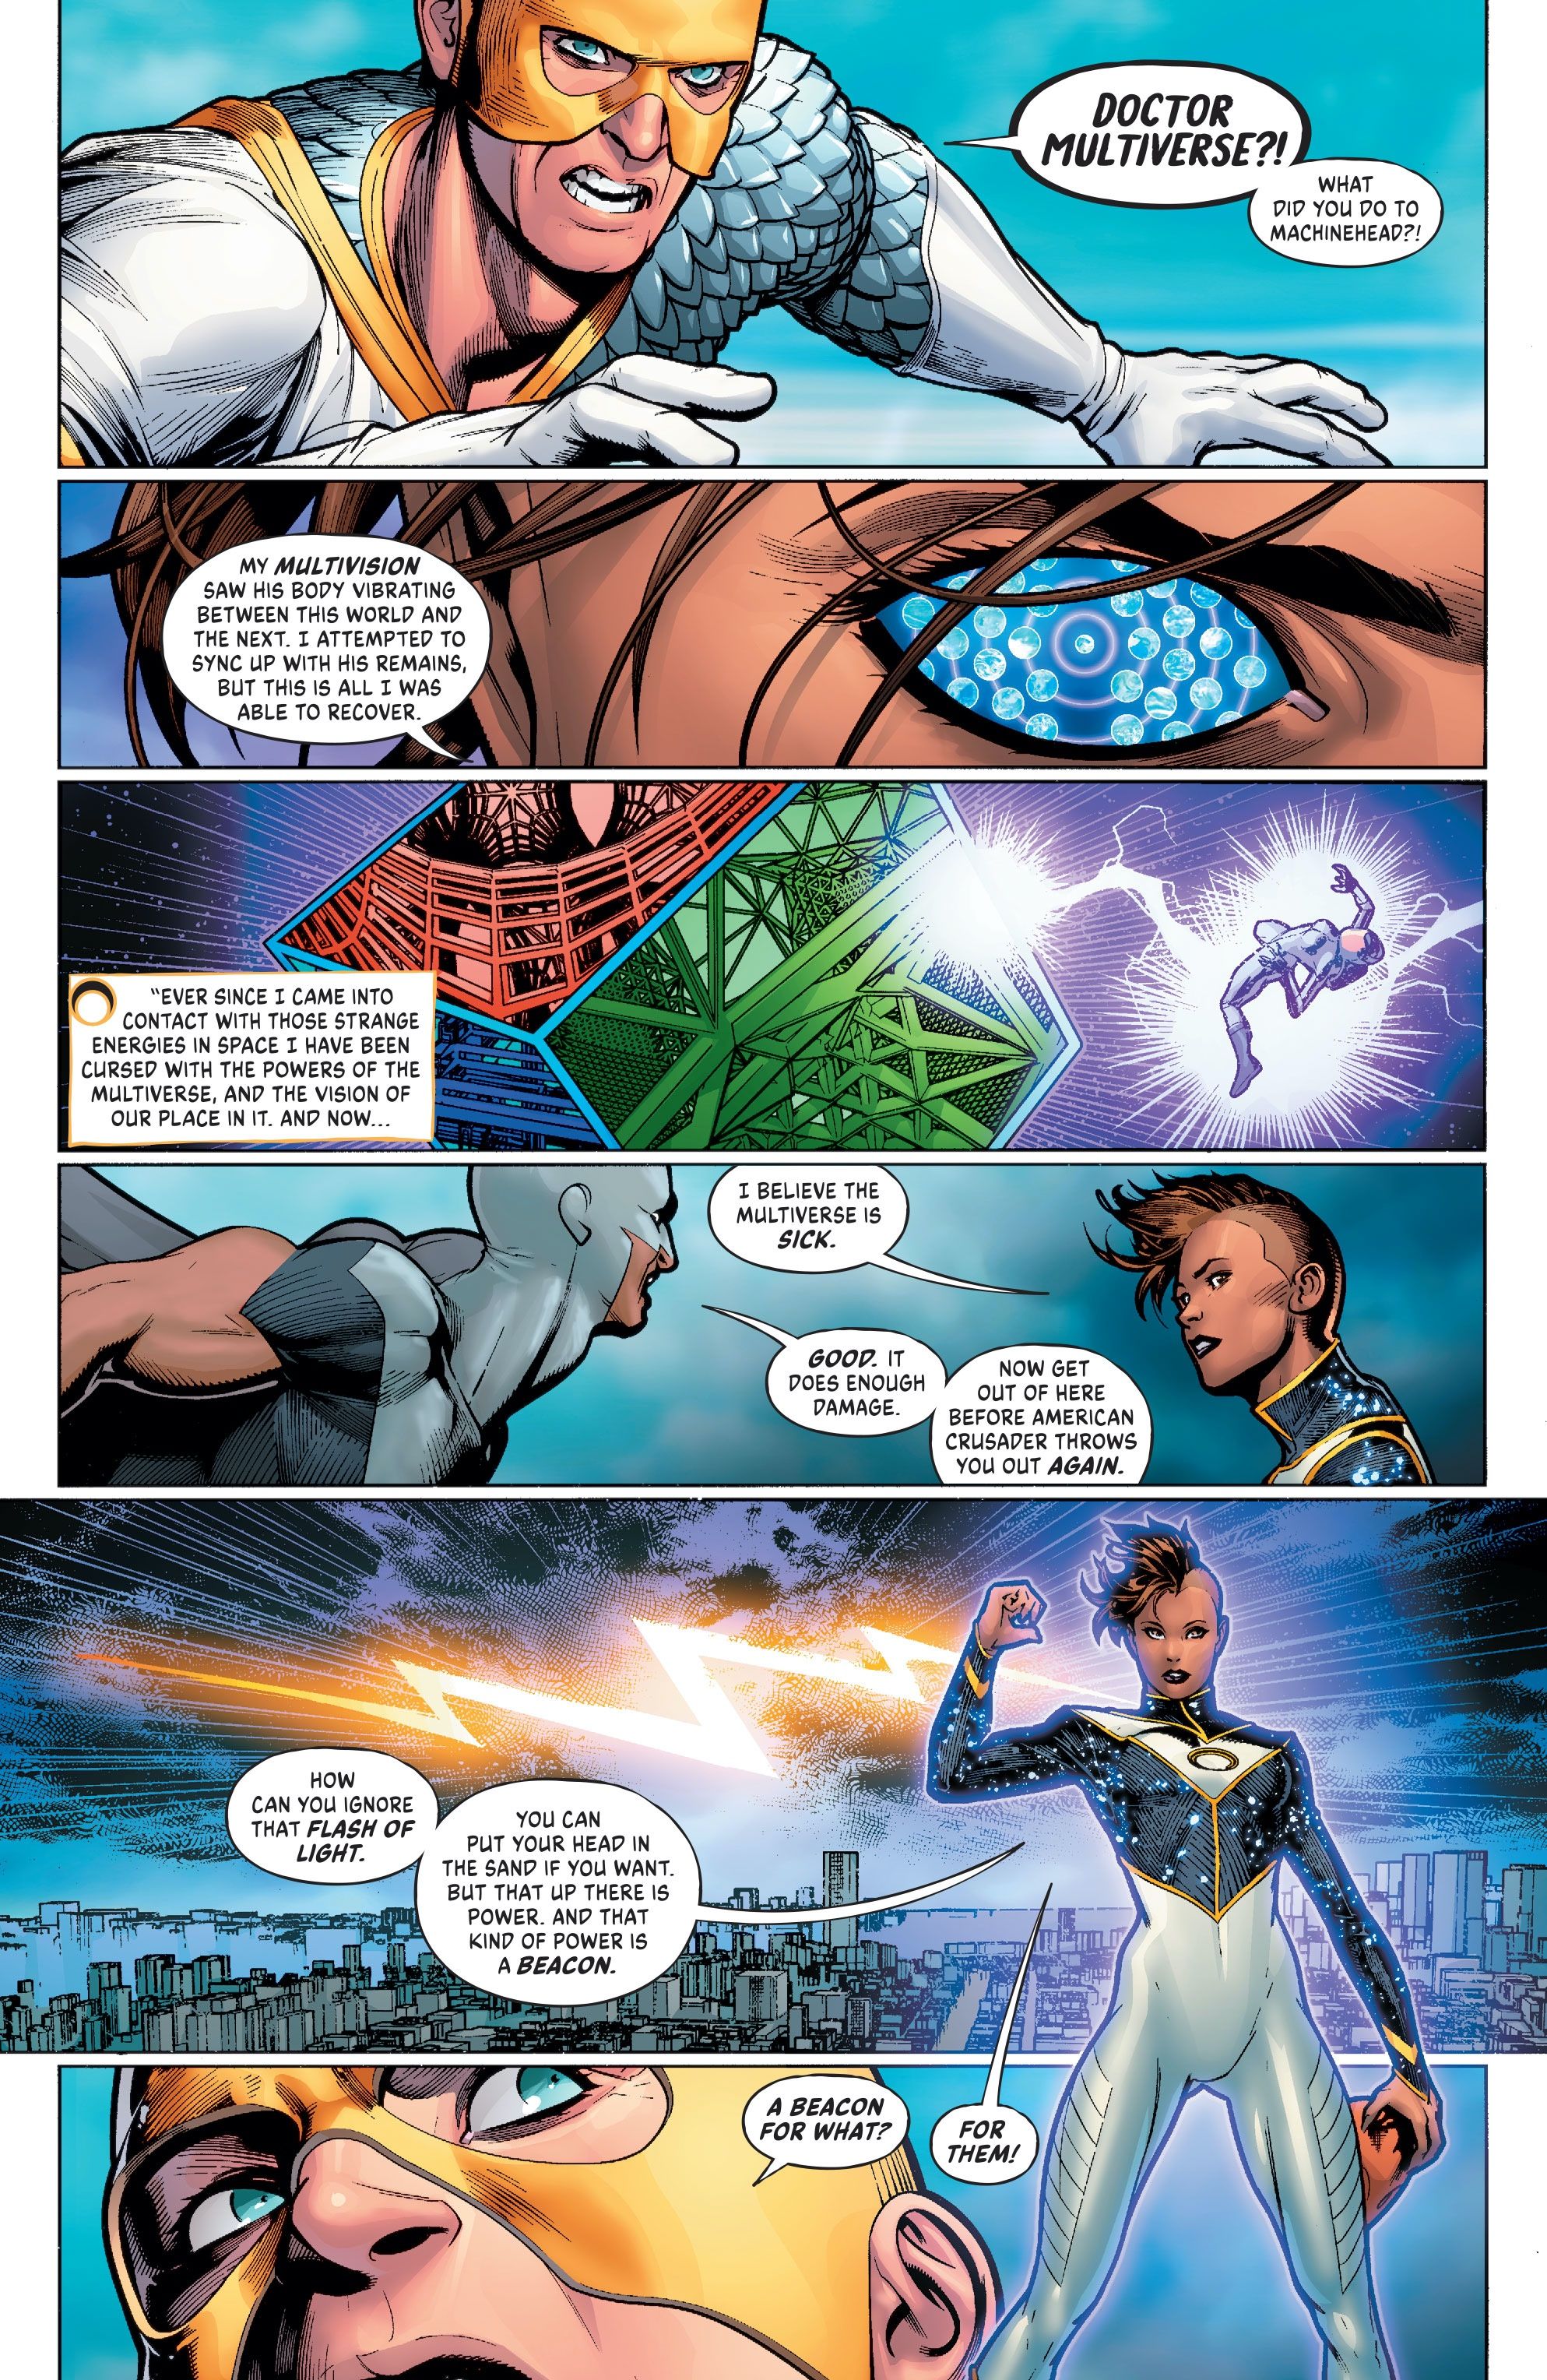 The Justice League of DCs Multiverse Prepares for War in New Preview